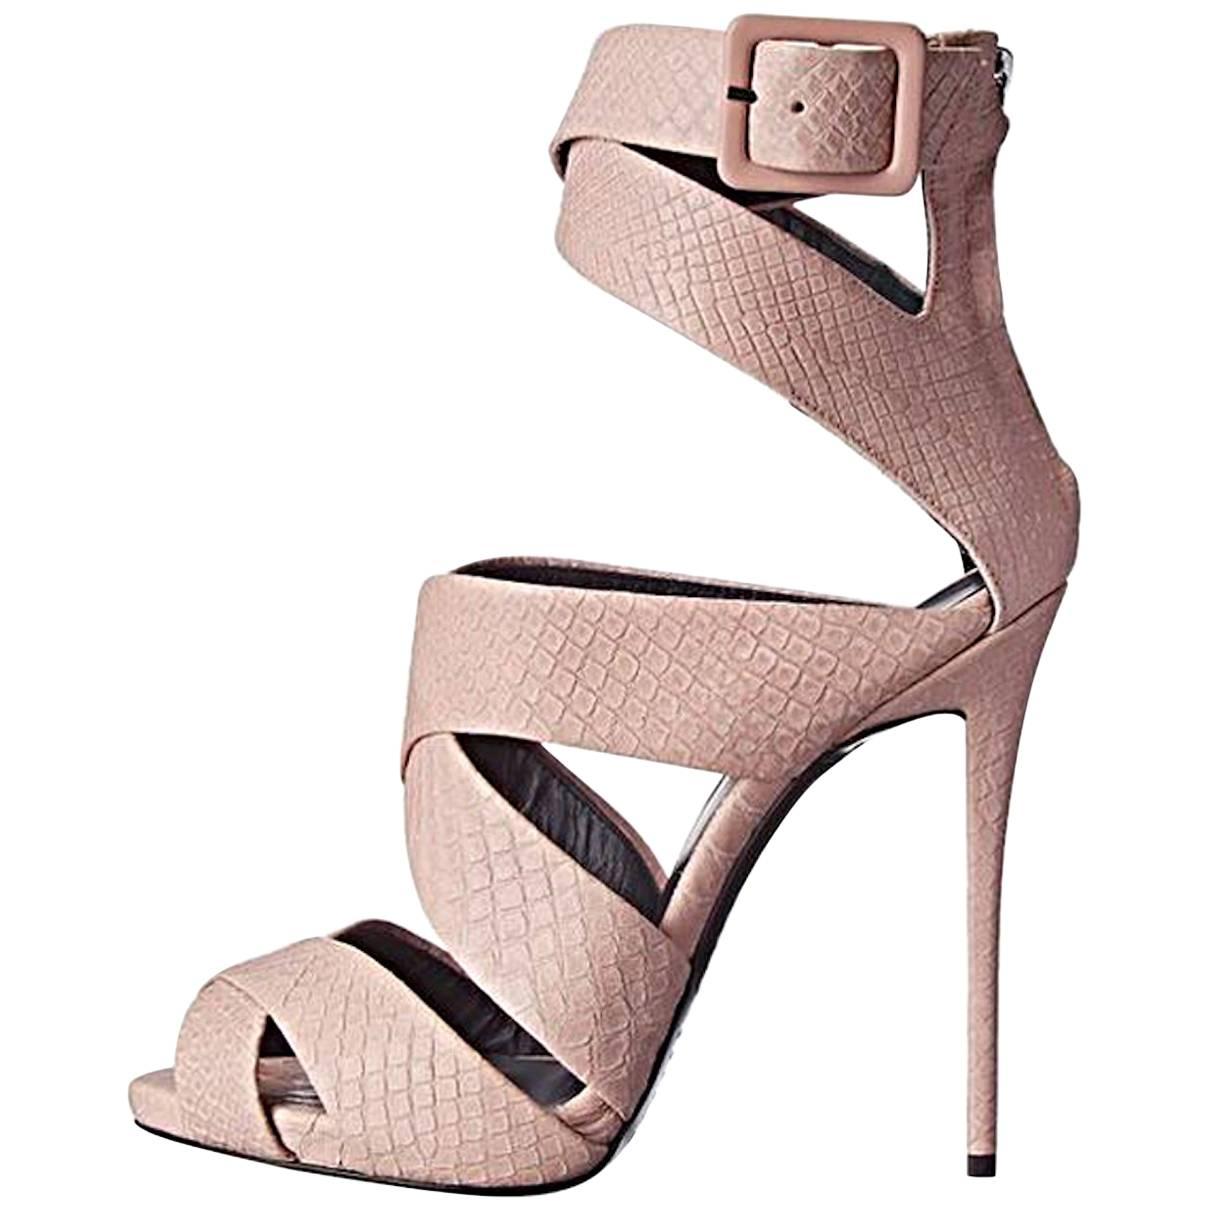 Giuseppi Zanotti New & Sold Out Blush Pink Leather Emboss Sandals Heels in Box